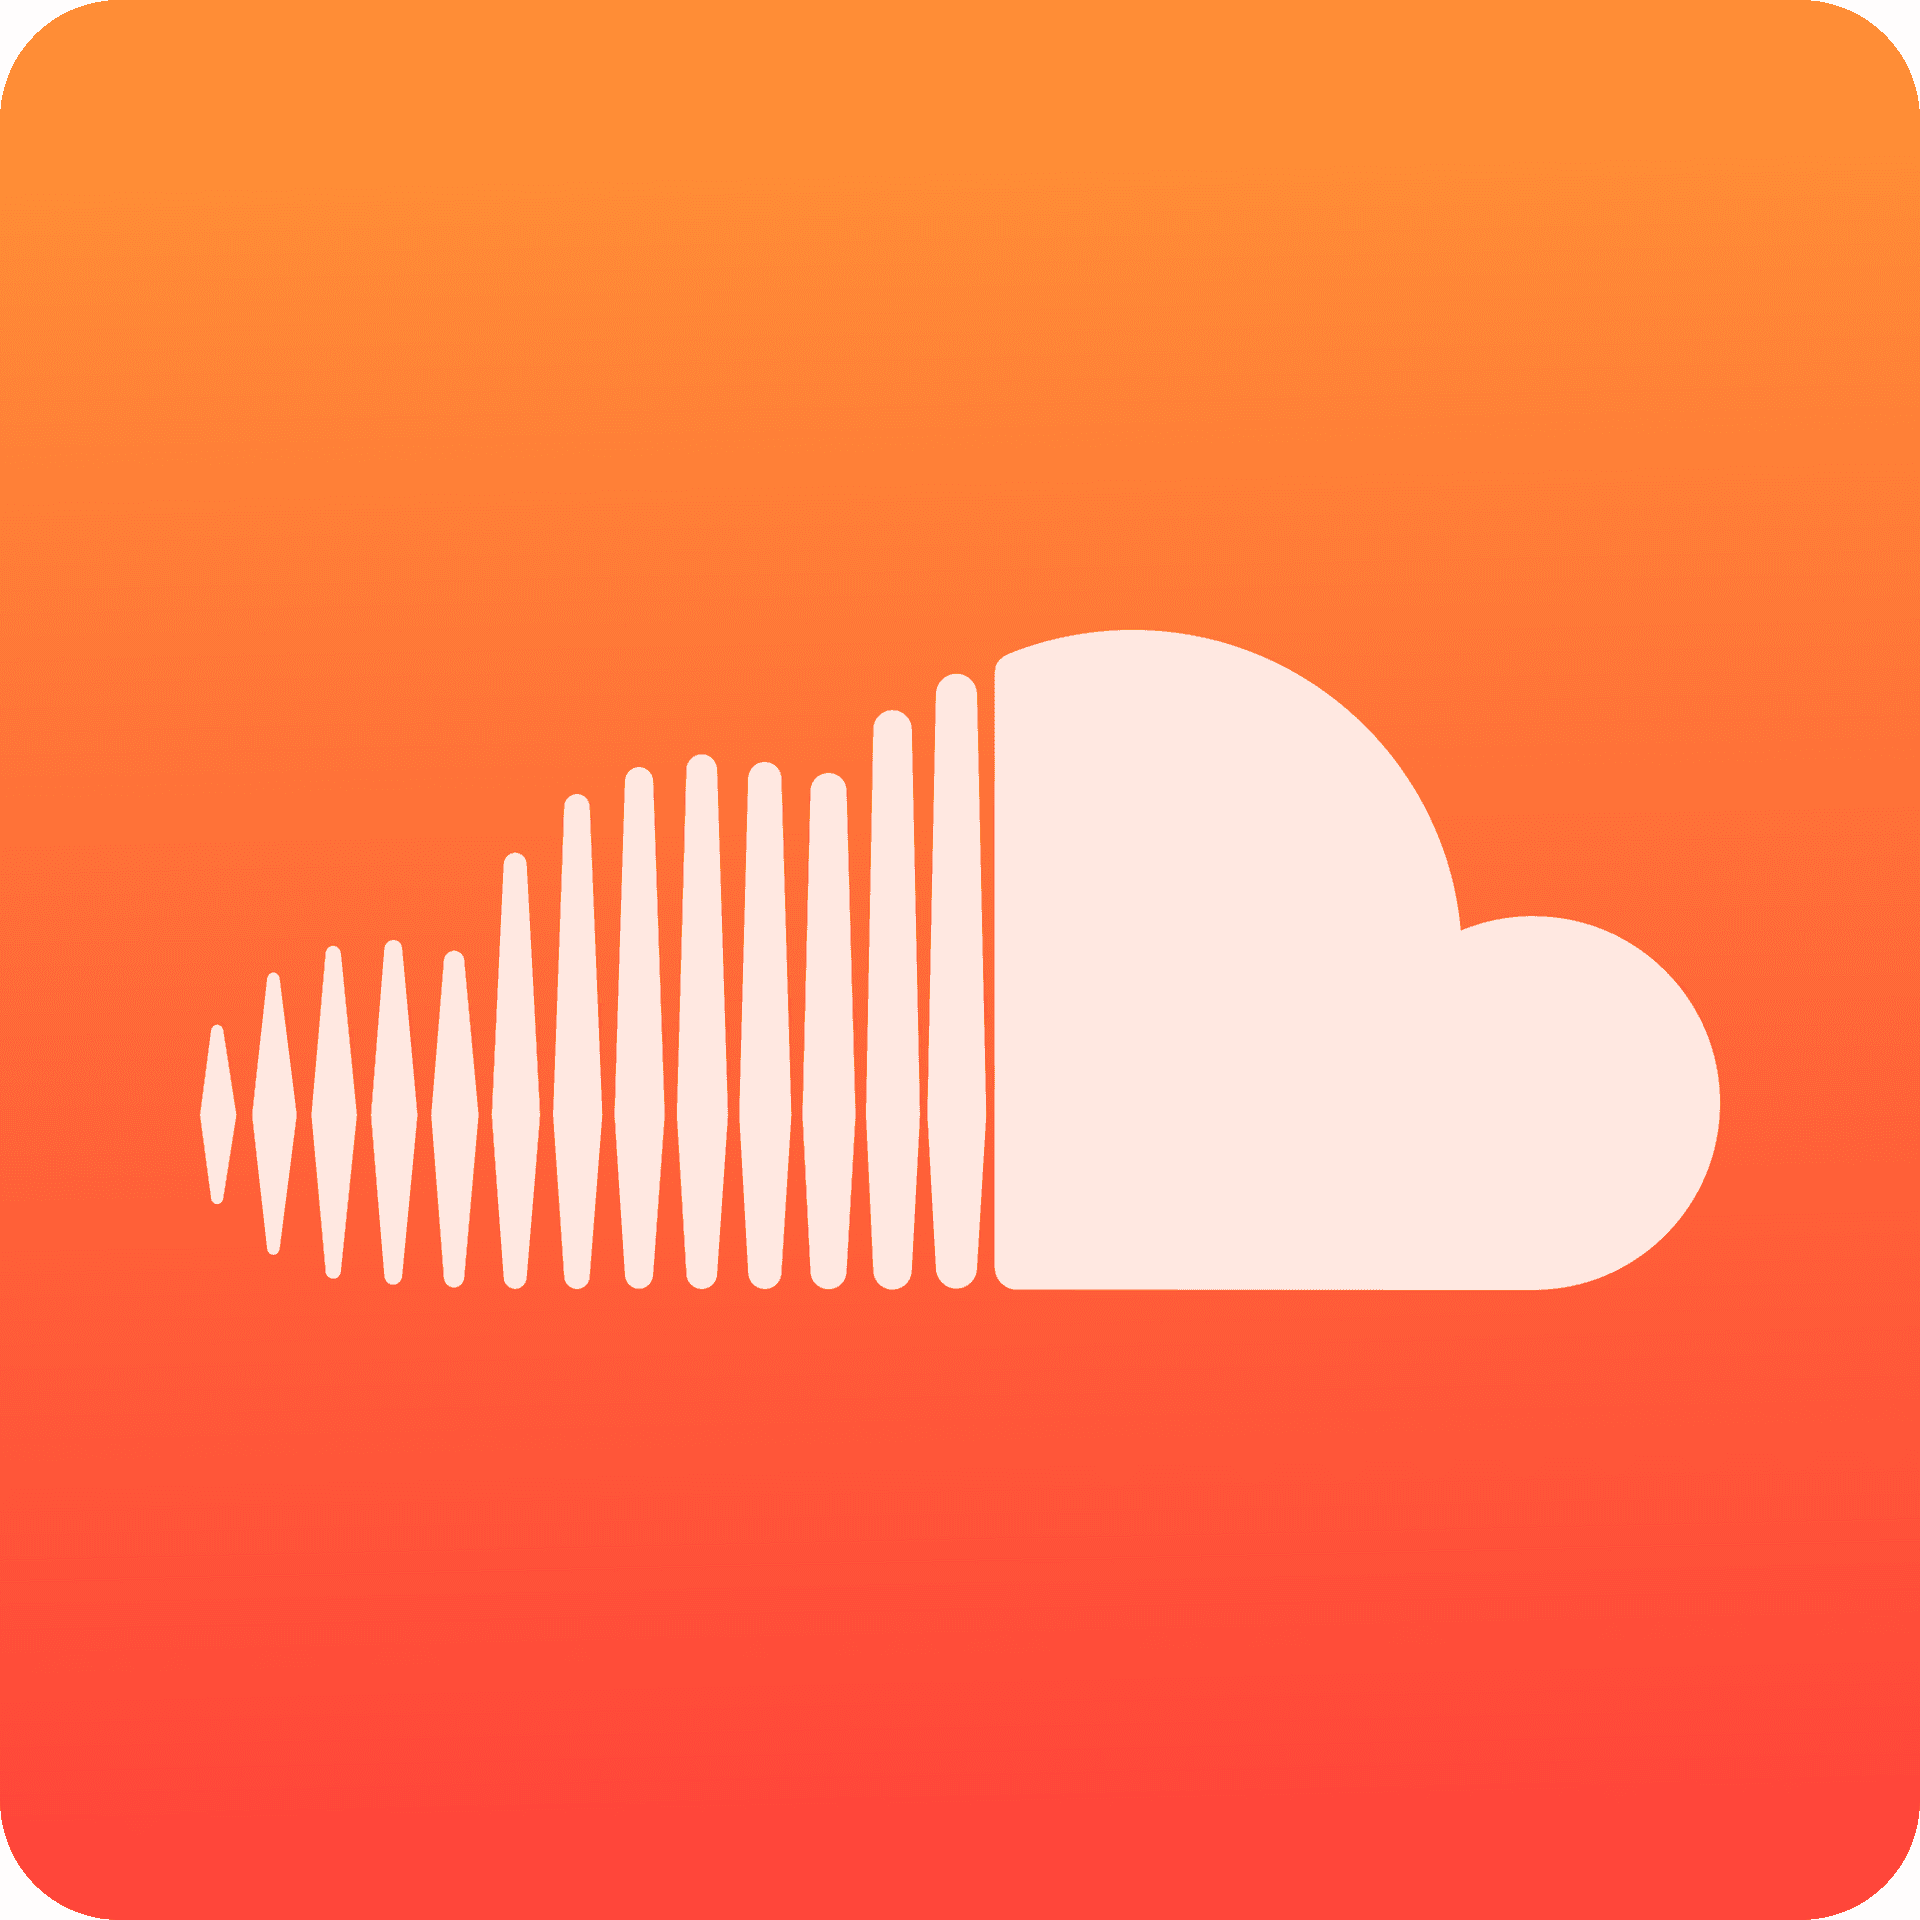 Create and Share Music with Soundcloud